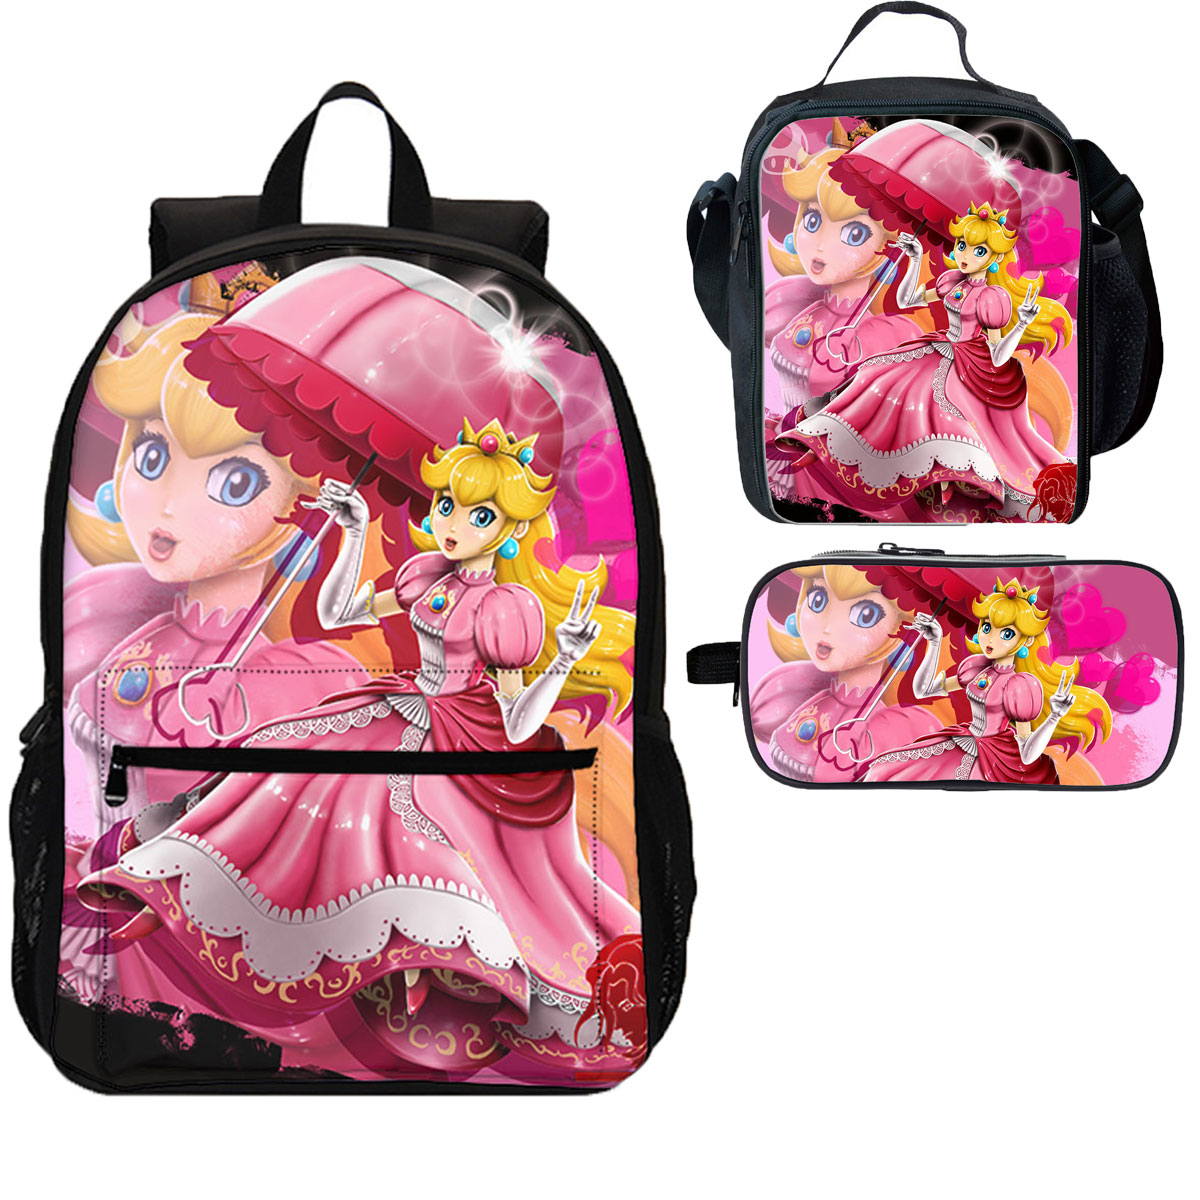 Princess Peach 3 Pieces Combo 18 inches School Backpack Lunch Bag Pencil Case